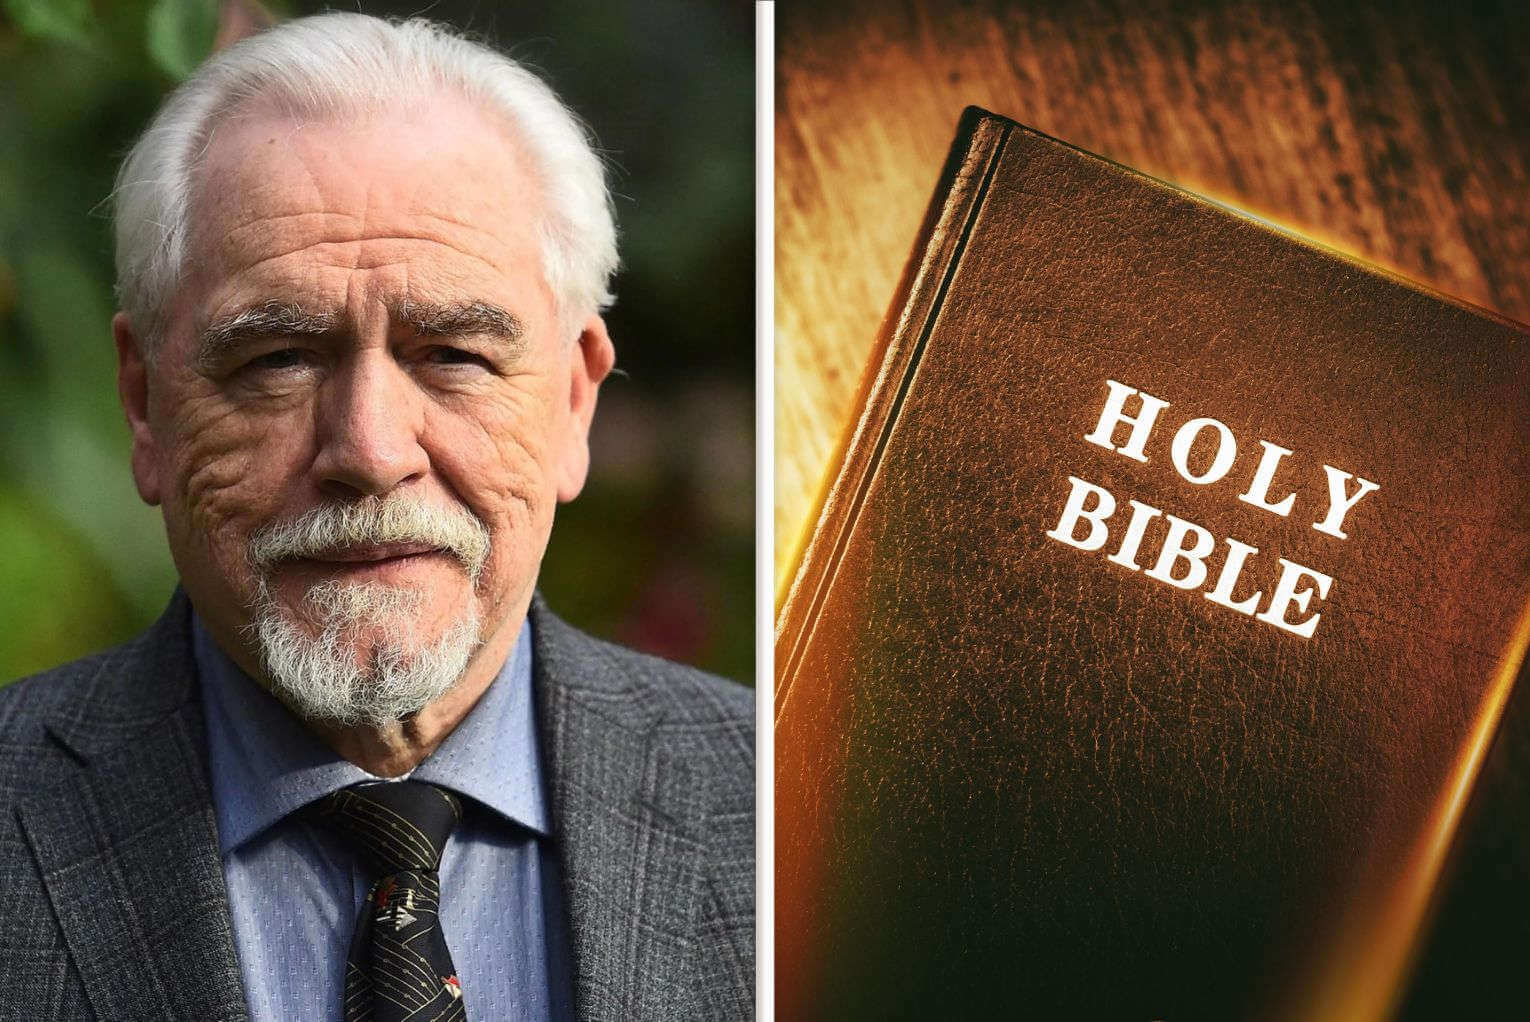 Hollywood Actor Criticizes Bible, Calls it ‘One of the Worst Books’